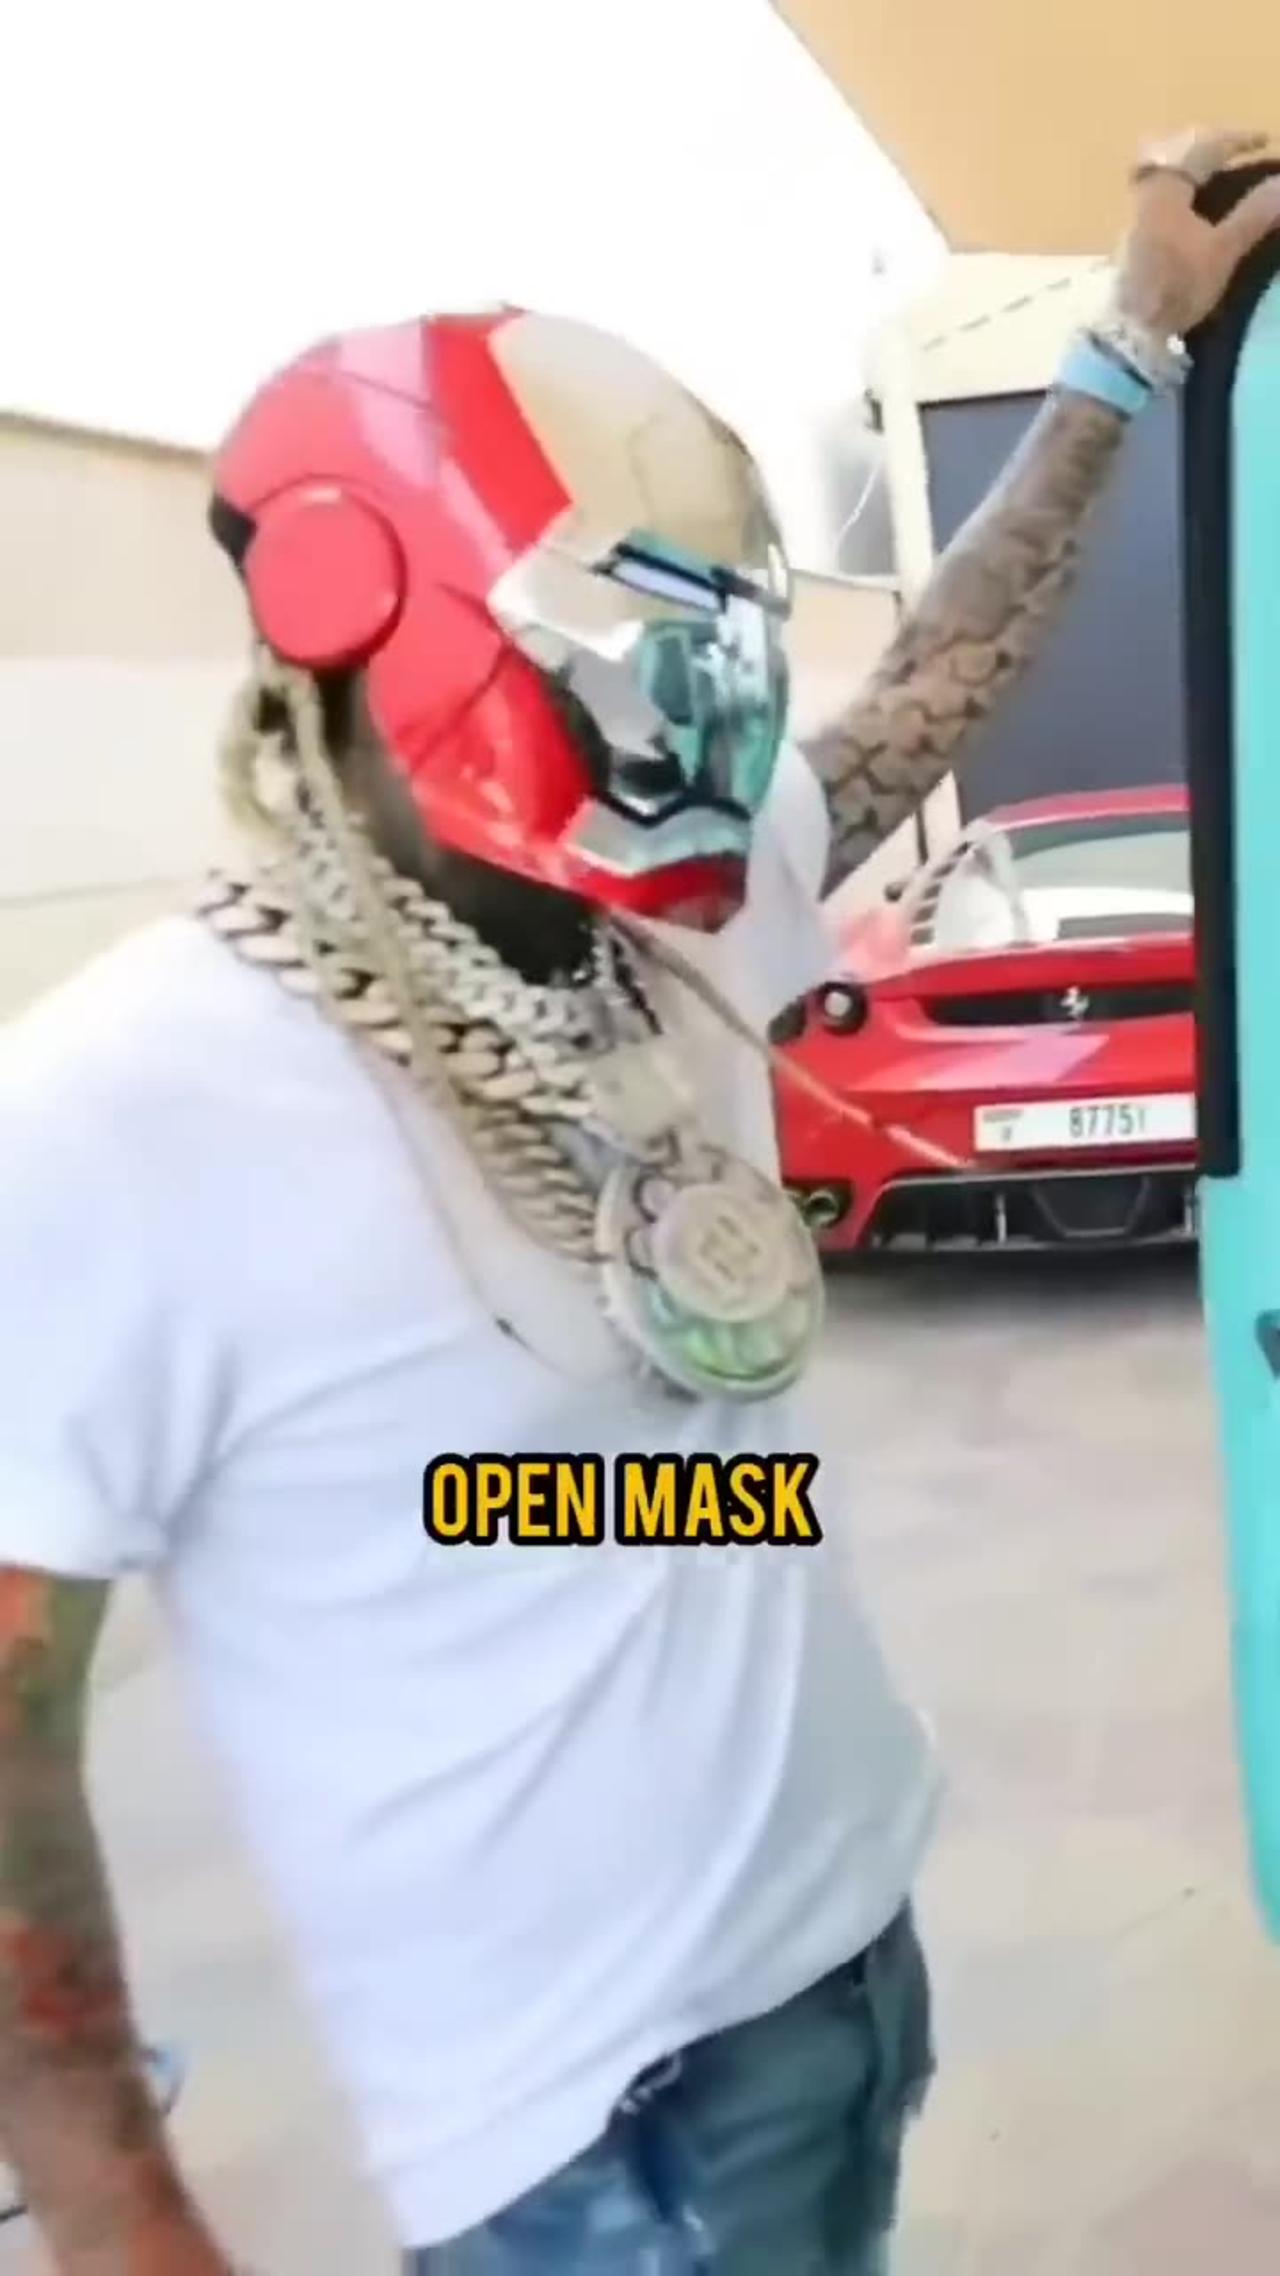 6ix9ine shooting his shot with the iron man mask